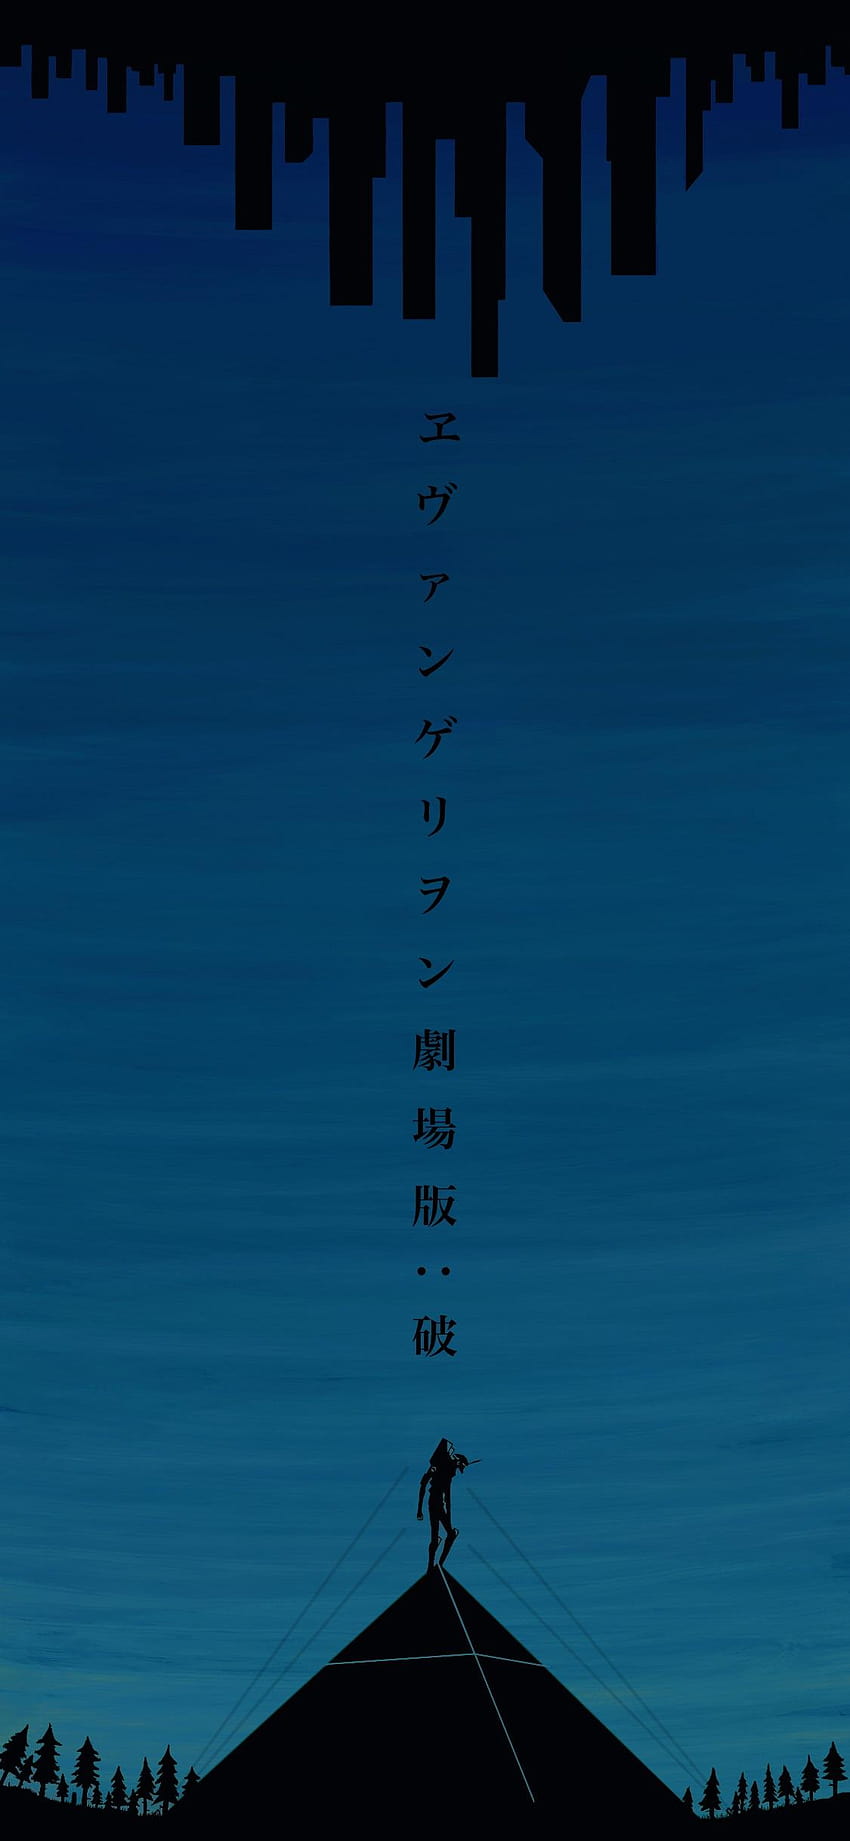 Made a for my phone a few months ago based on the 2.0, evangelion phone HD phone wallpaper